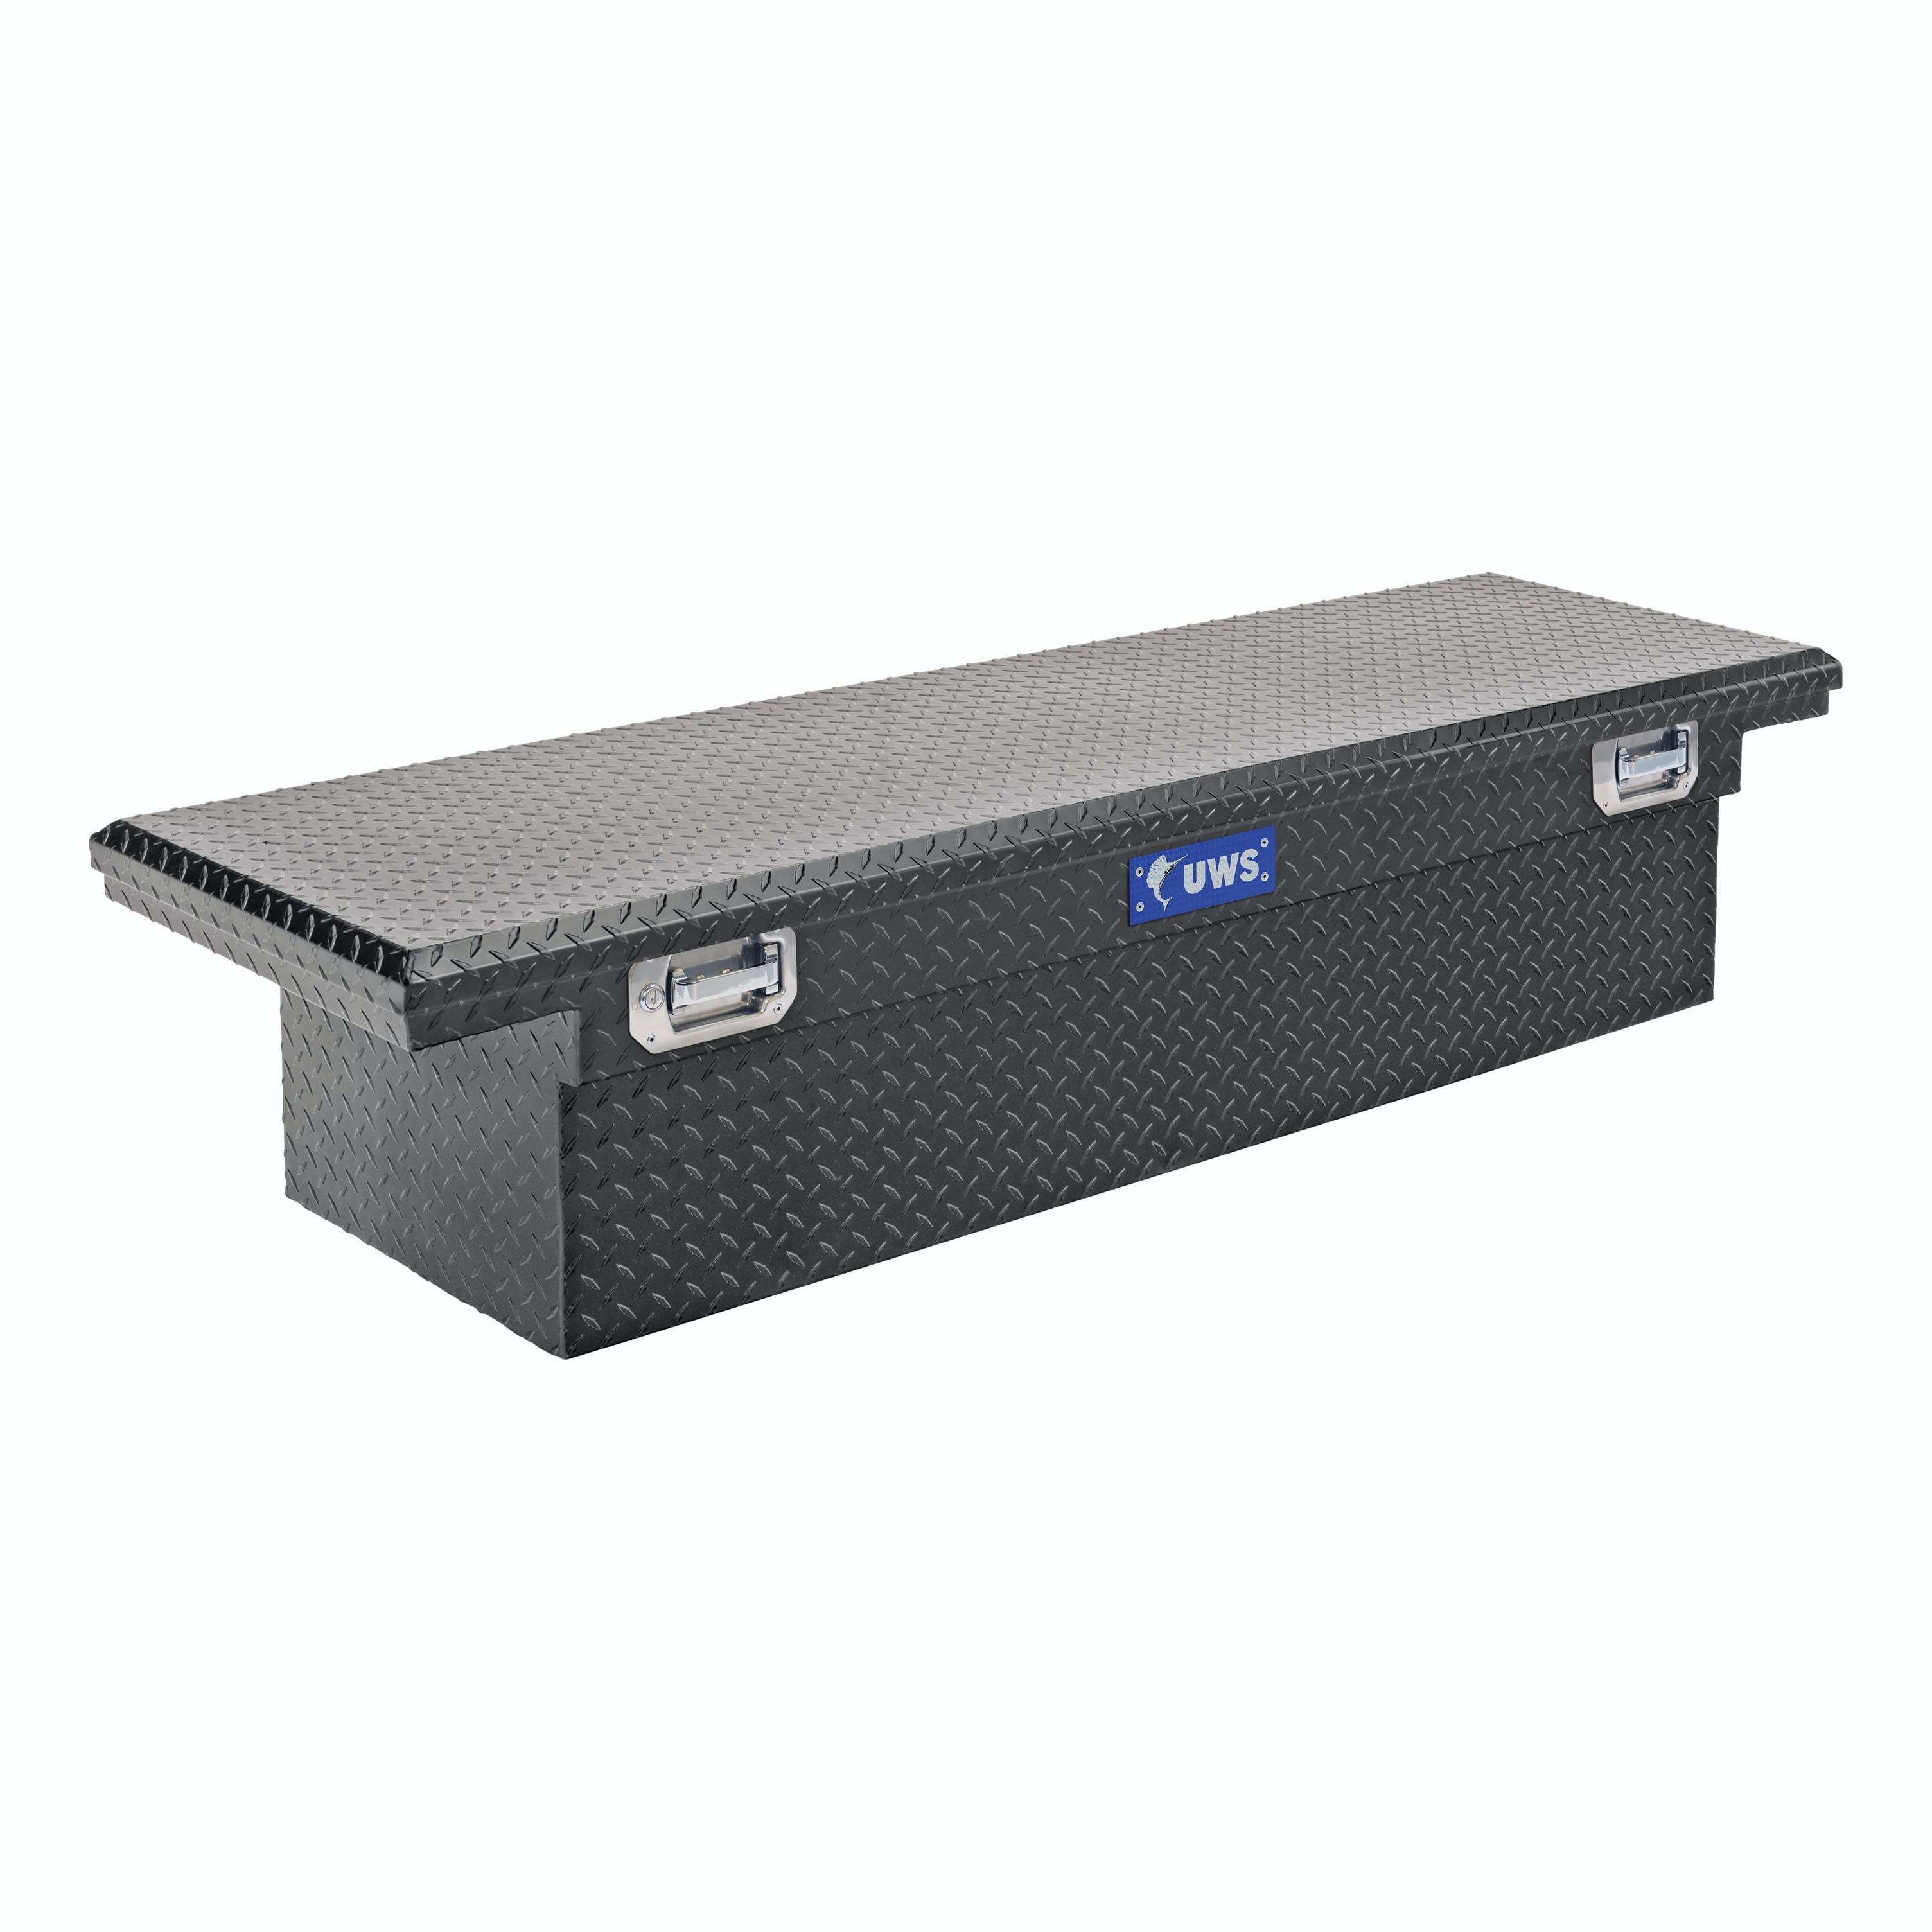 UWS TBS-72-LP-PH-MB 72 inch Aluminum Single Lid Crossover Toolbox Pull Handle Low Profile Matte Black